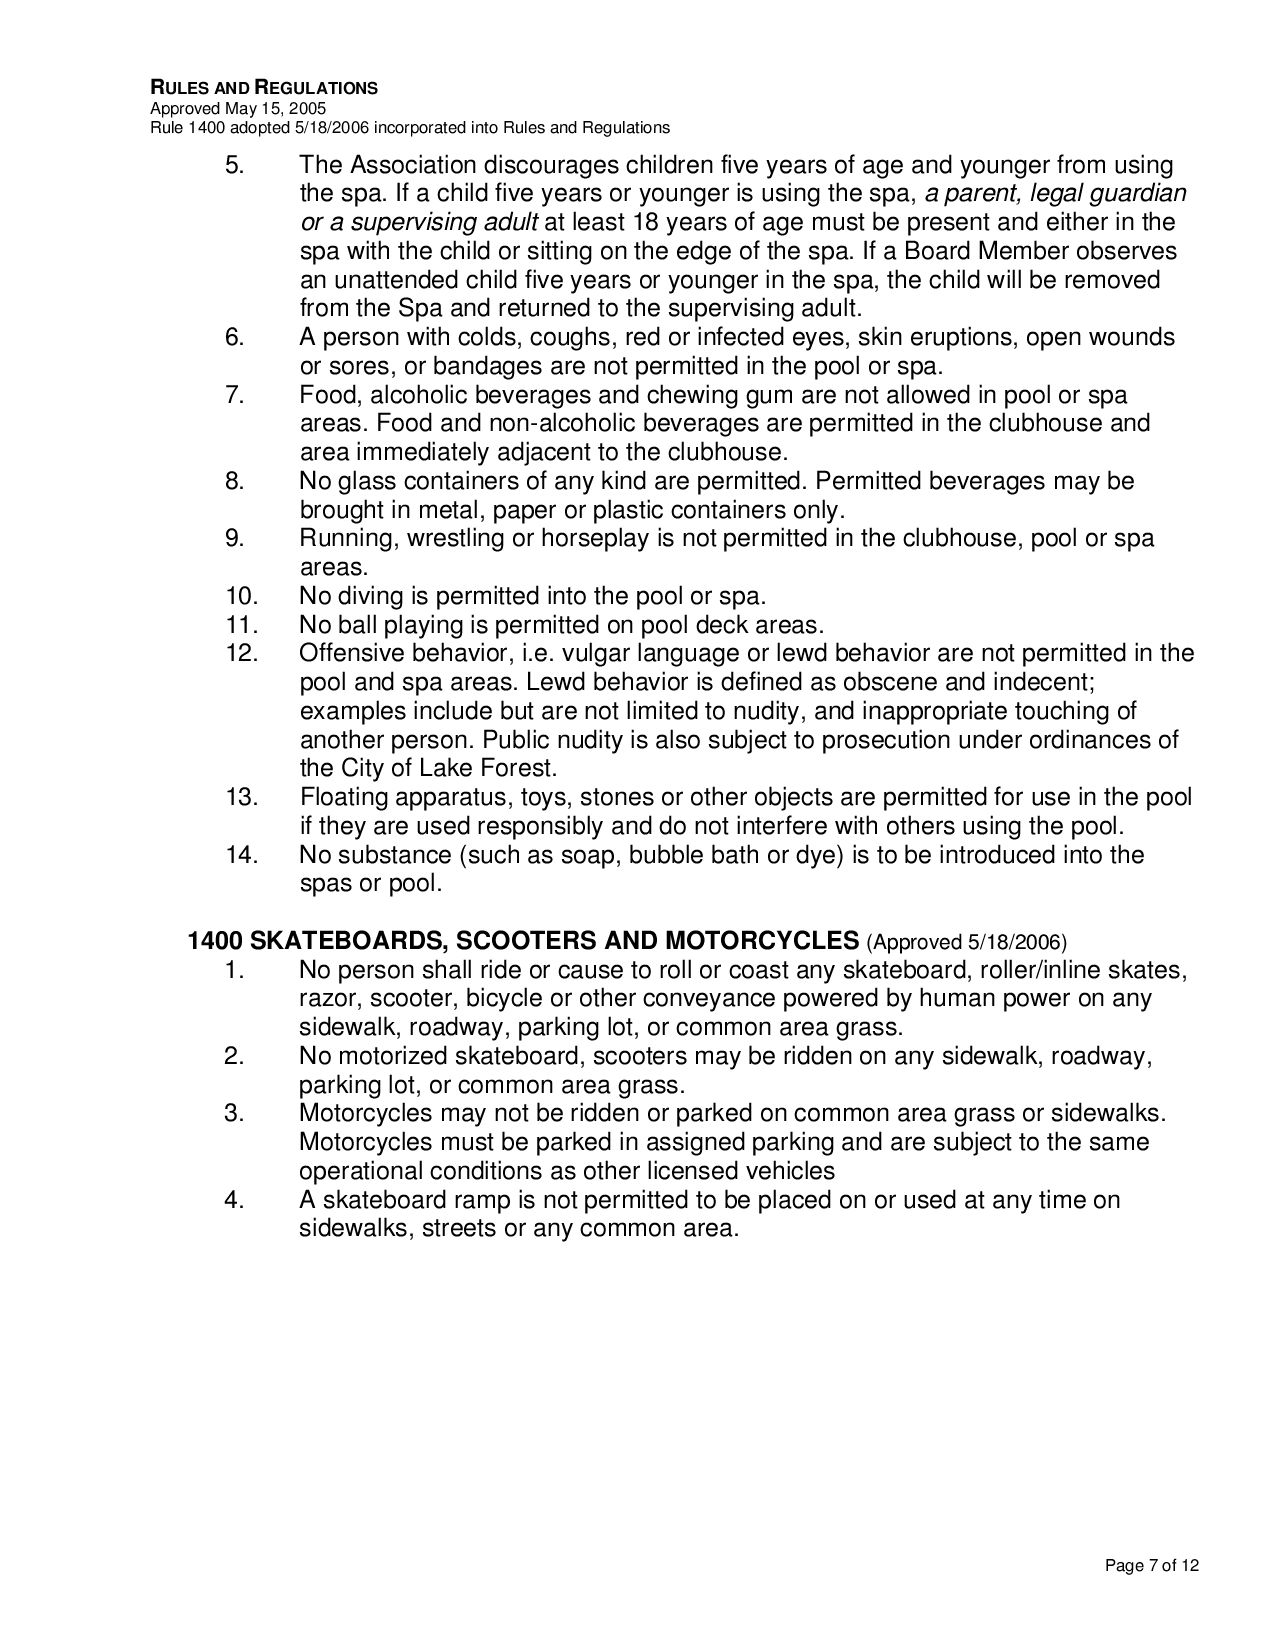 Page 7 of the HOA Rules and Regulations